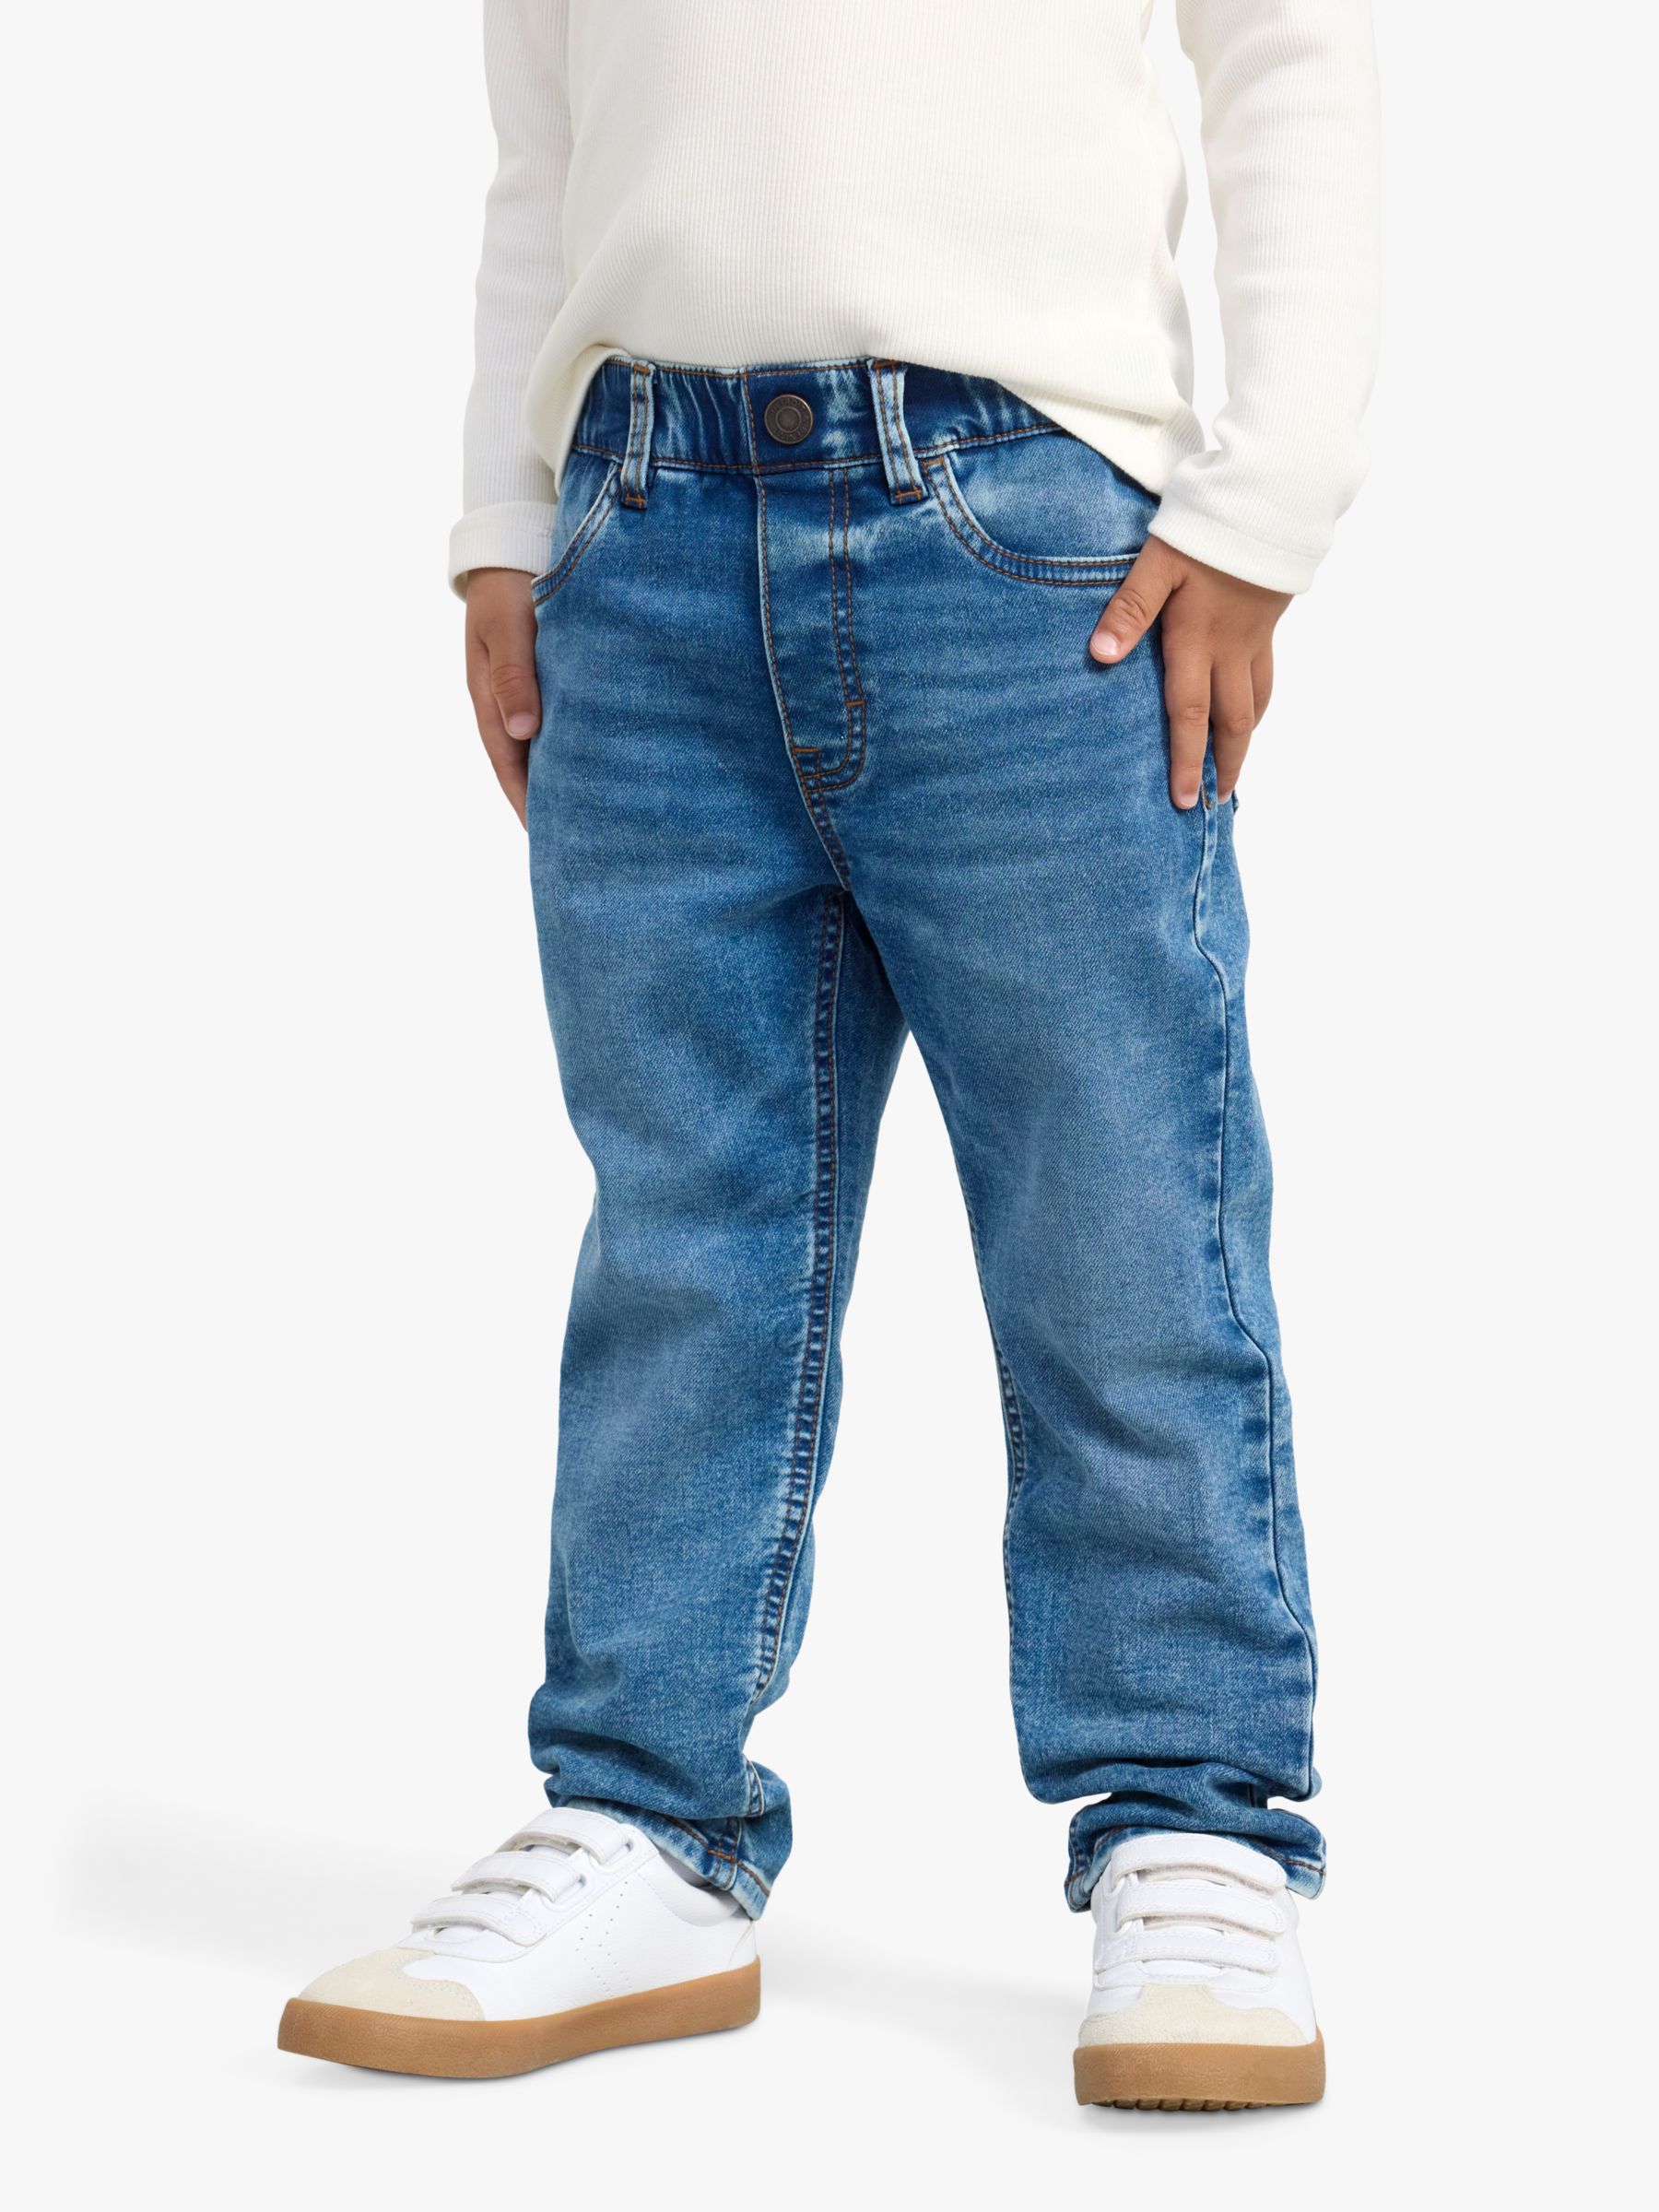 Lindex Kids' Tapered Cotton Blend Jeans, Blue, 2 years